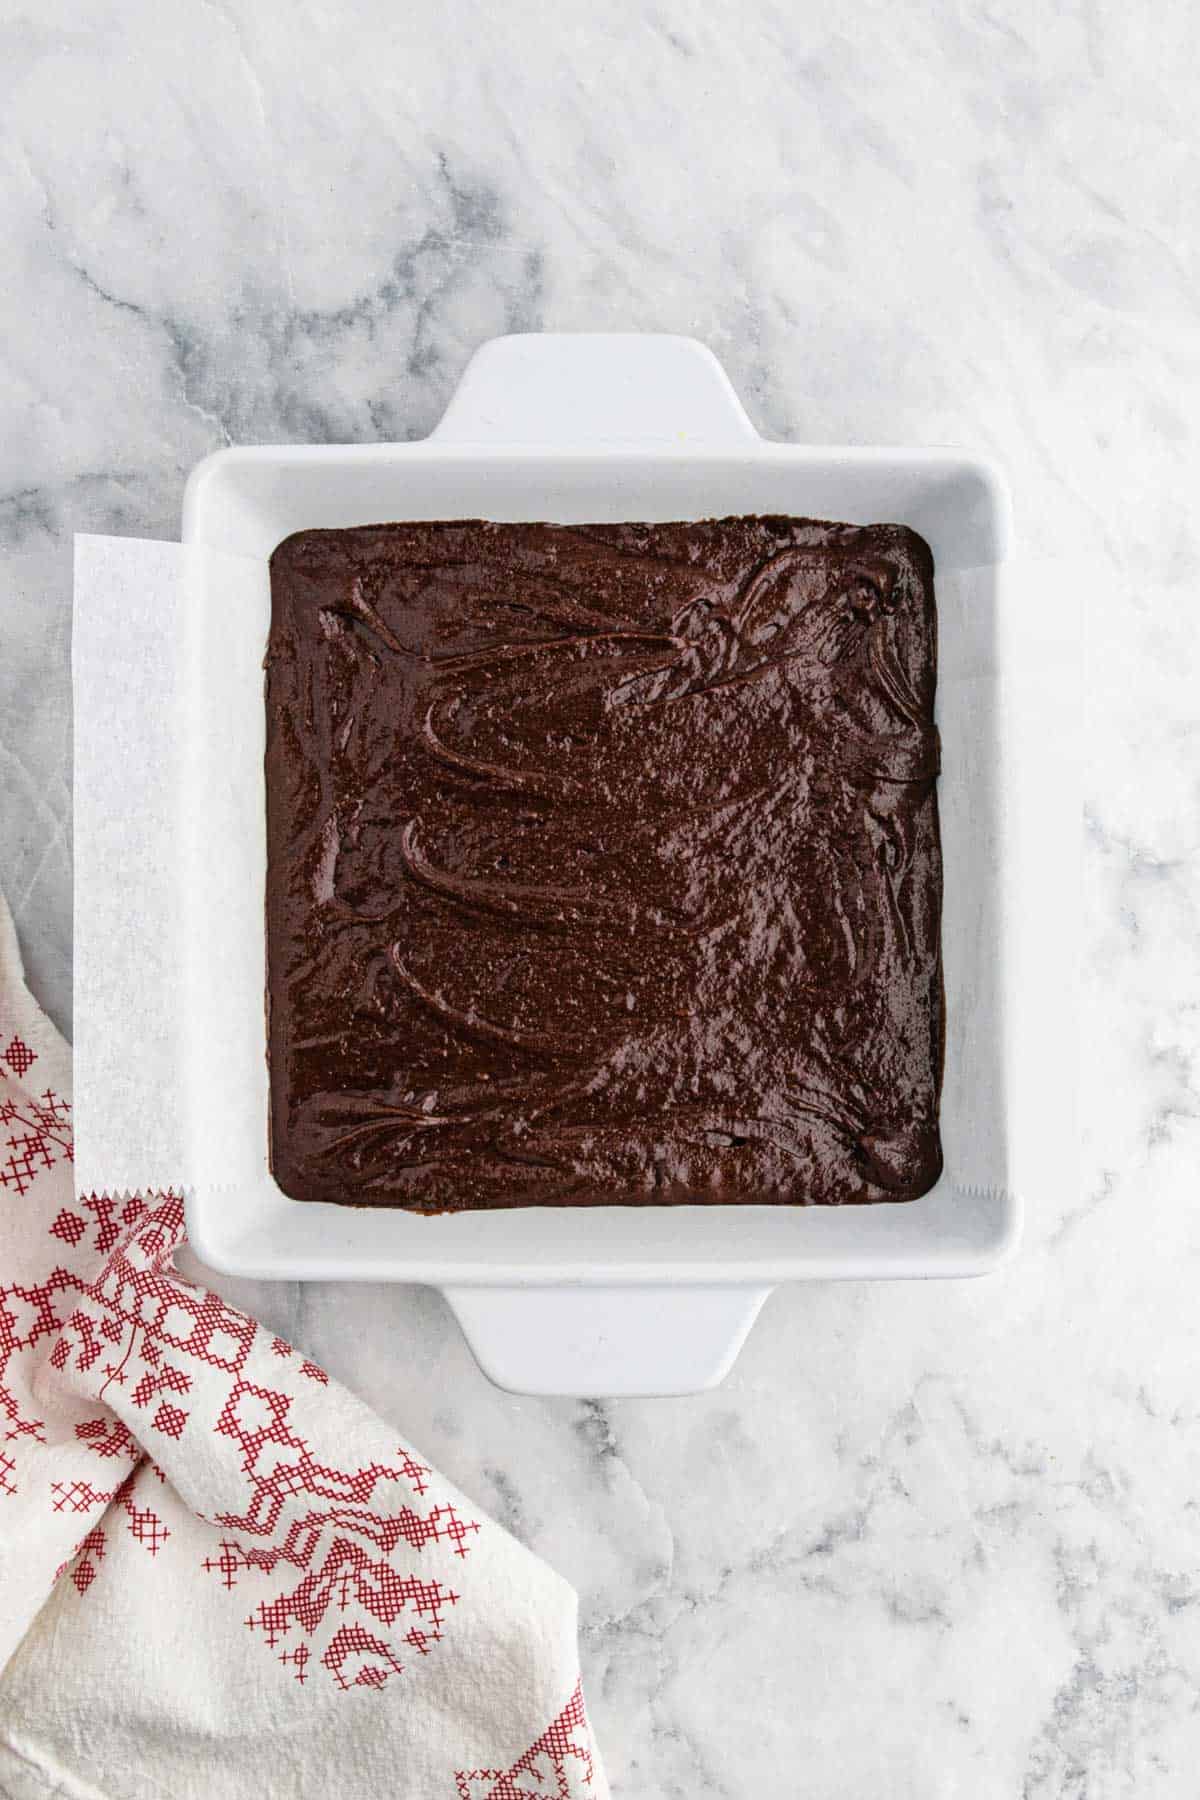 Peppermint brownie batter poured into baking pan.